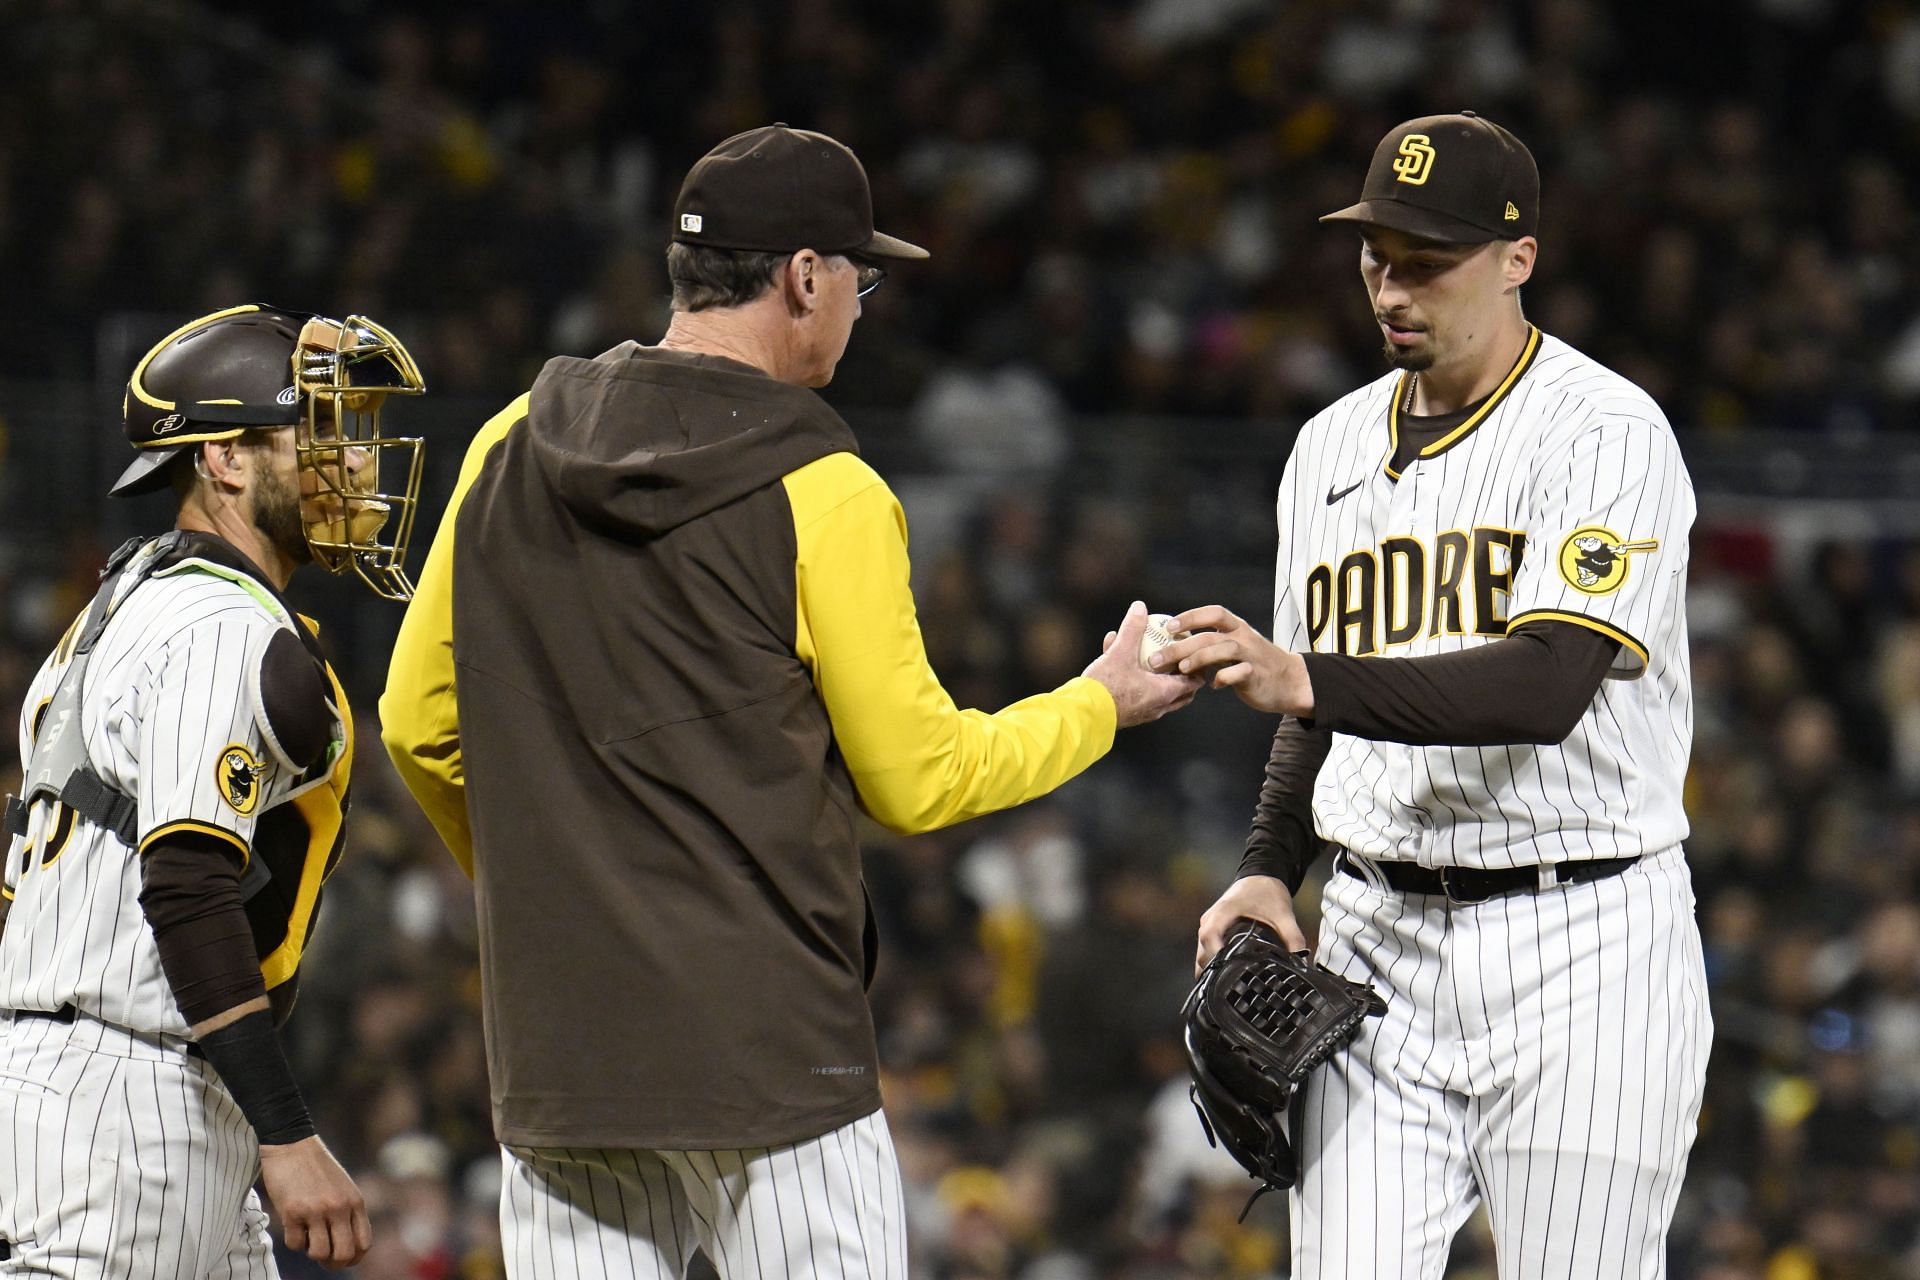 Padres' Blake Snell hit by suspected drunk driver, 'lucky' to